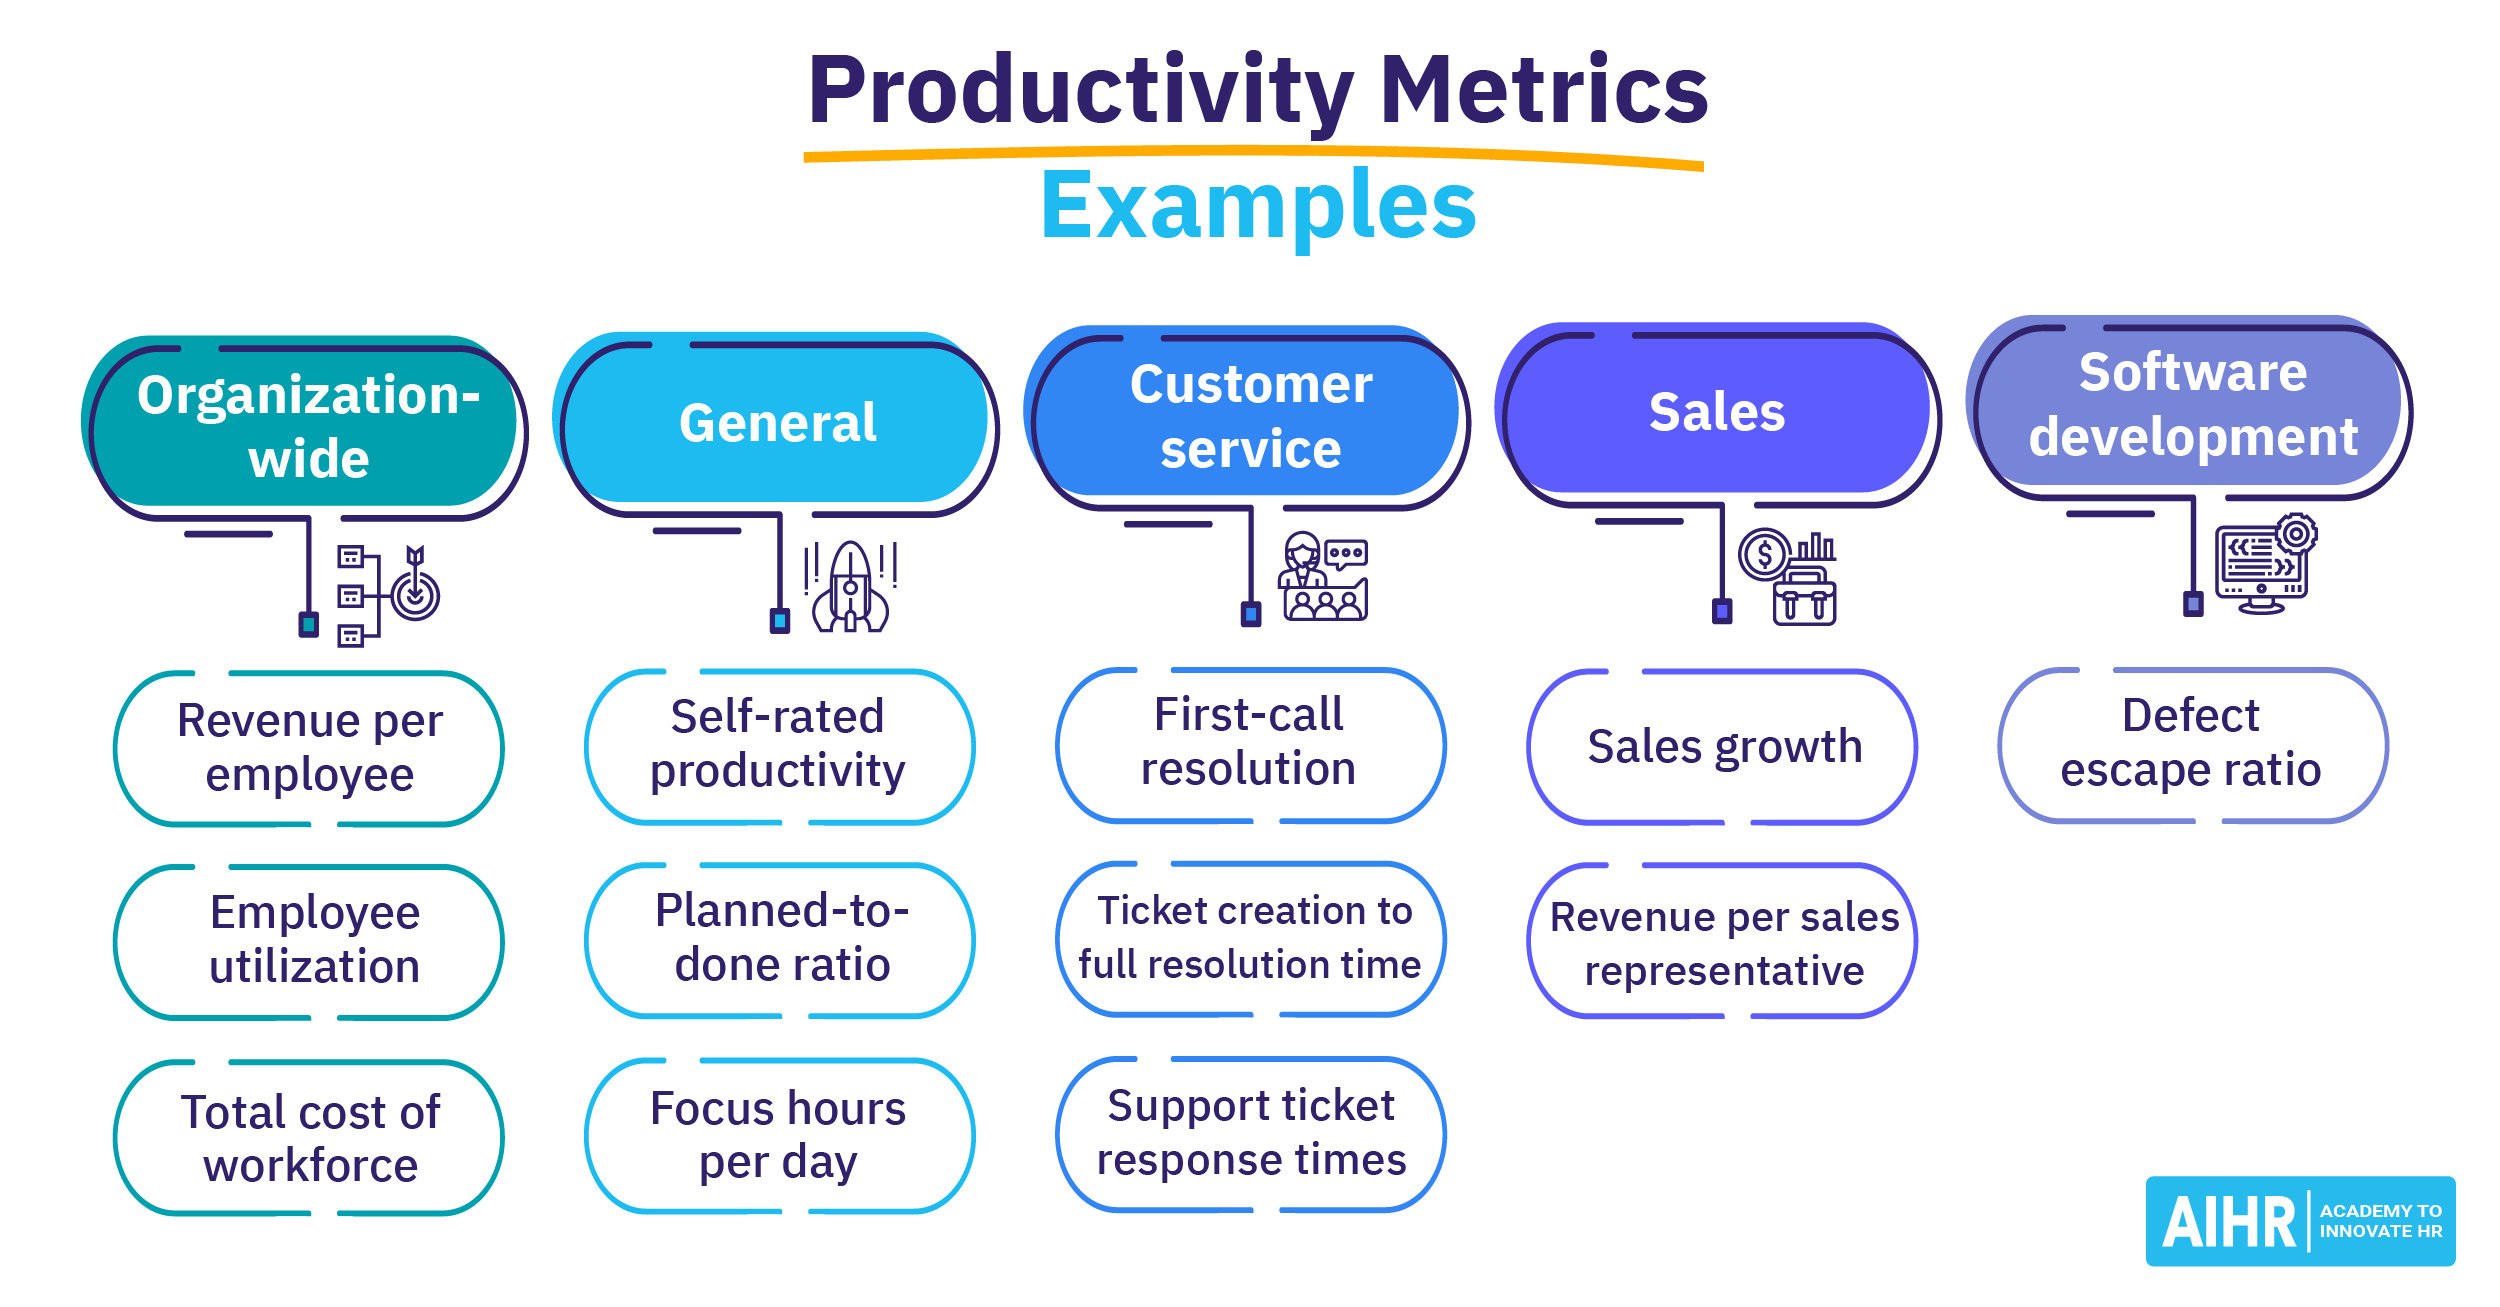 A table with examples of productivity metrics, including revenue per employee, self-rated productivity, first-call resolution, sales growth, and defect escape ratio.